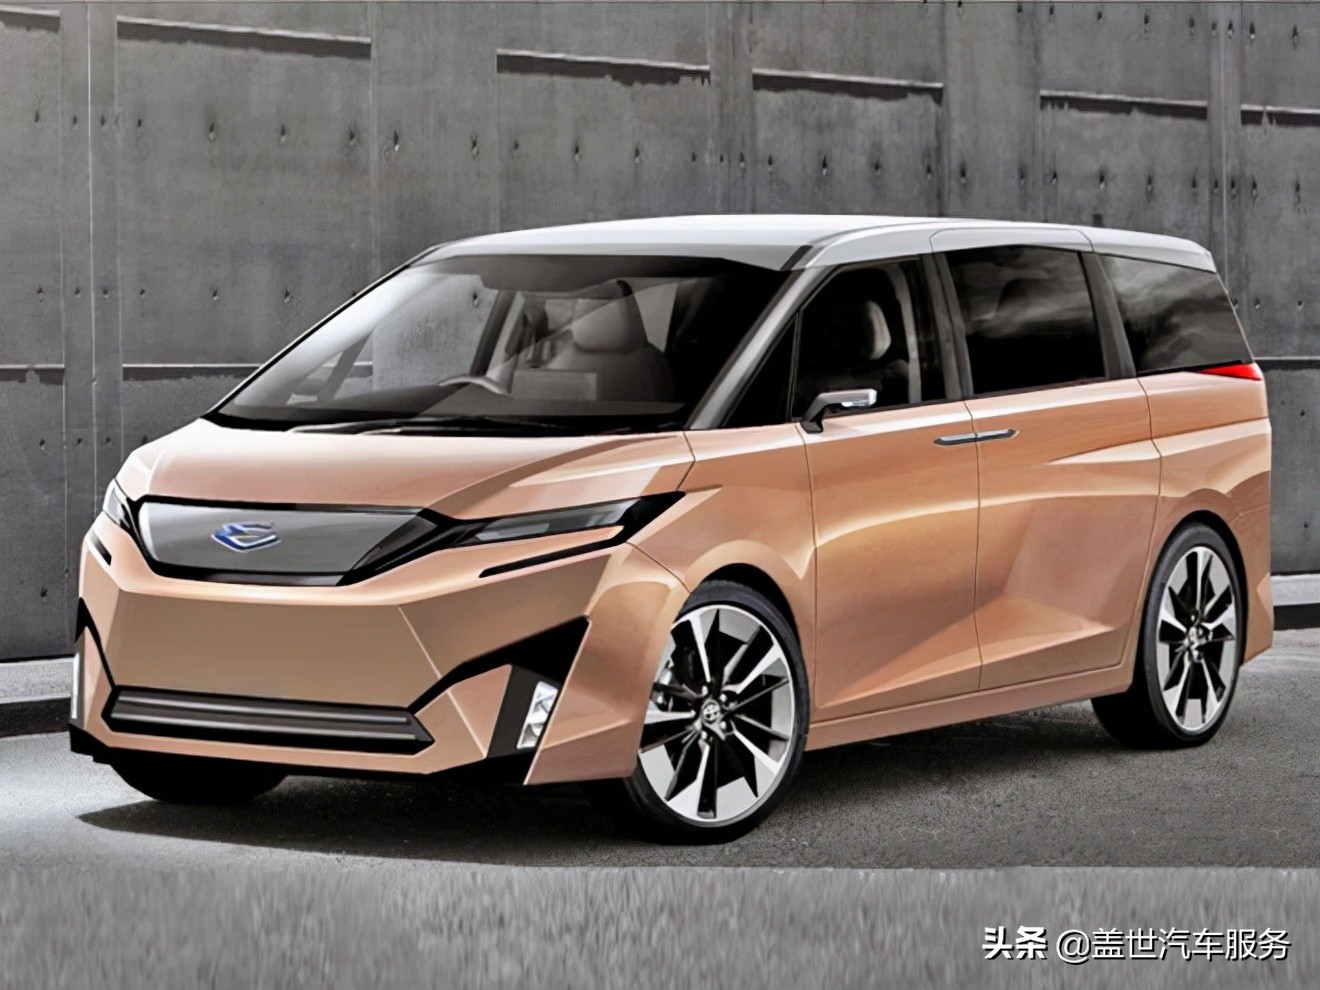 Toyota's new Previa or resurrection in 2024 will turn to pure electric